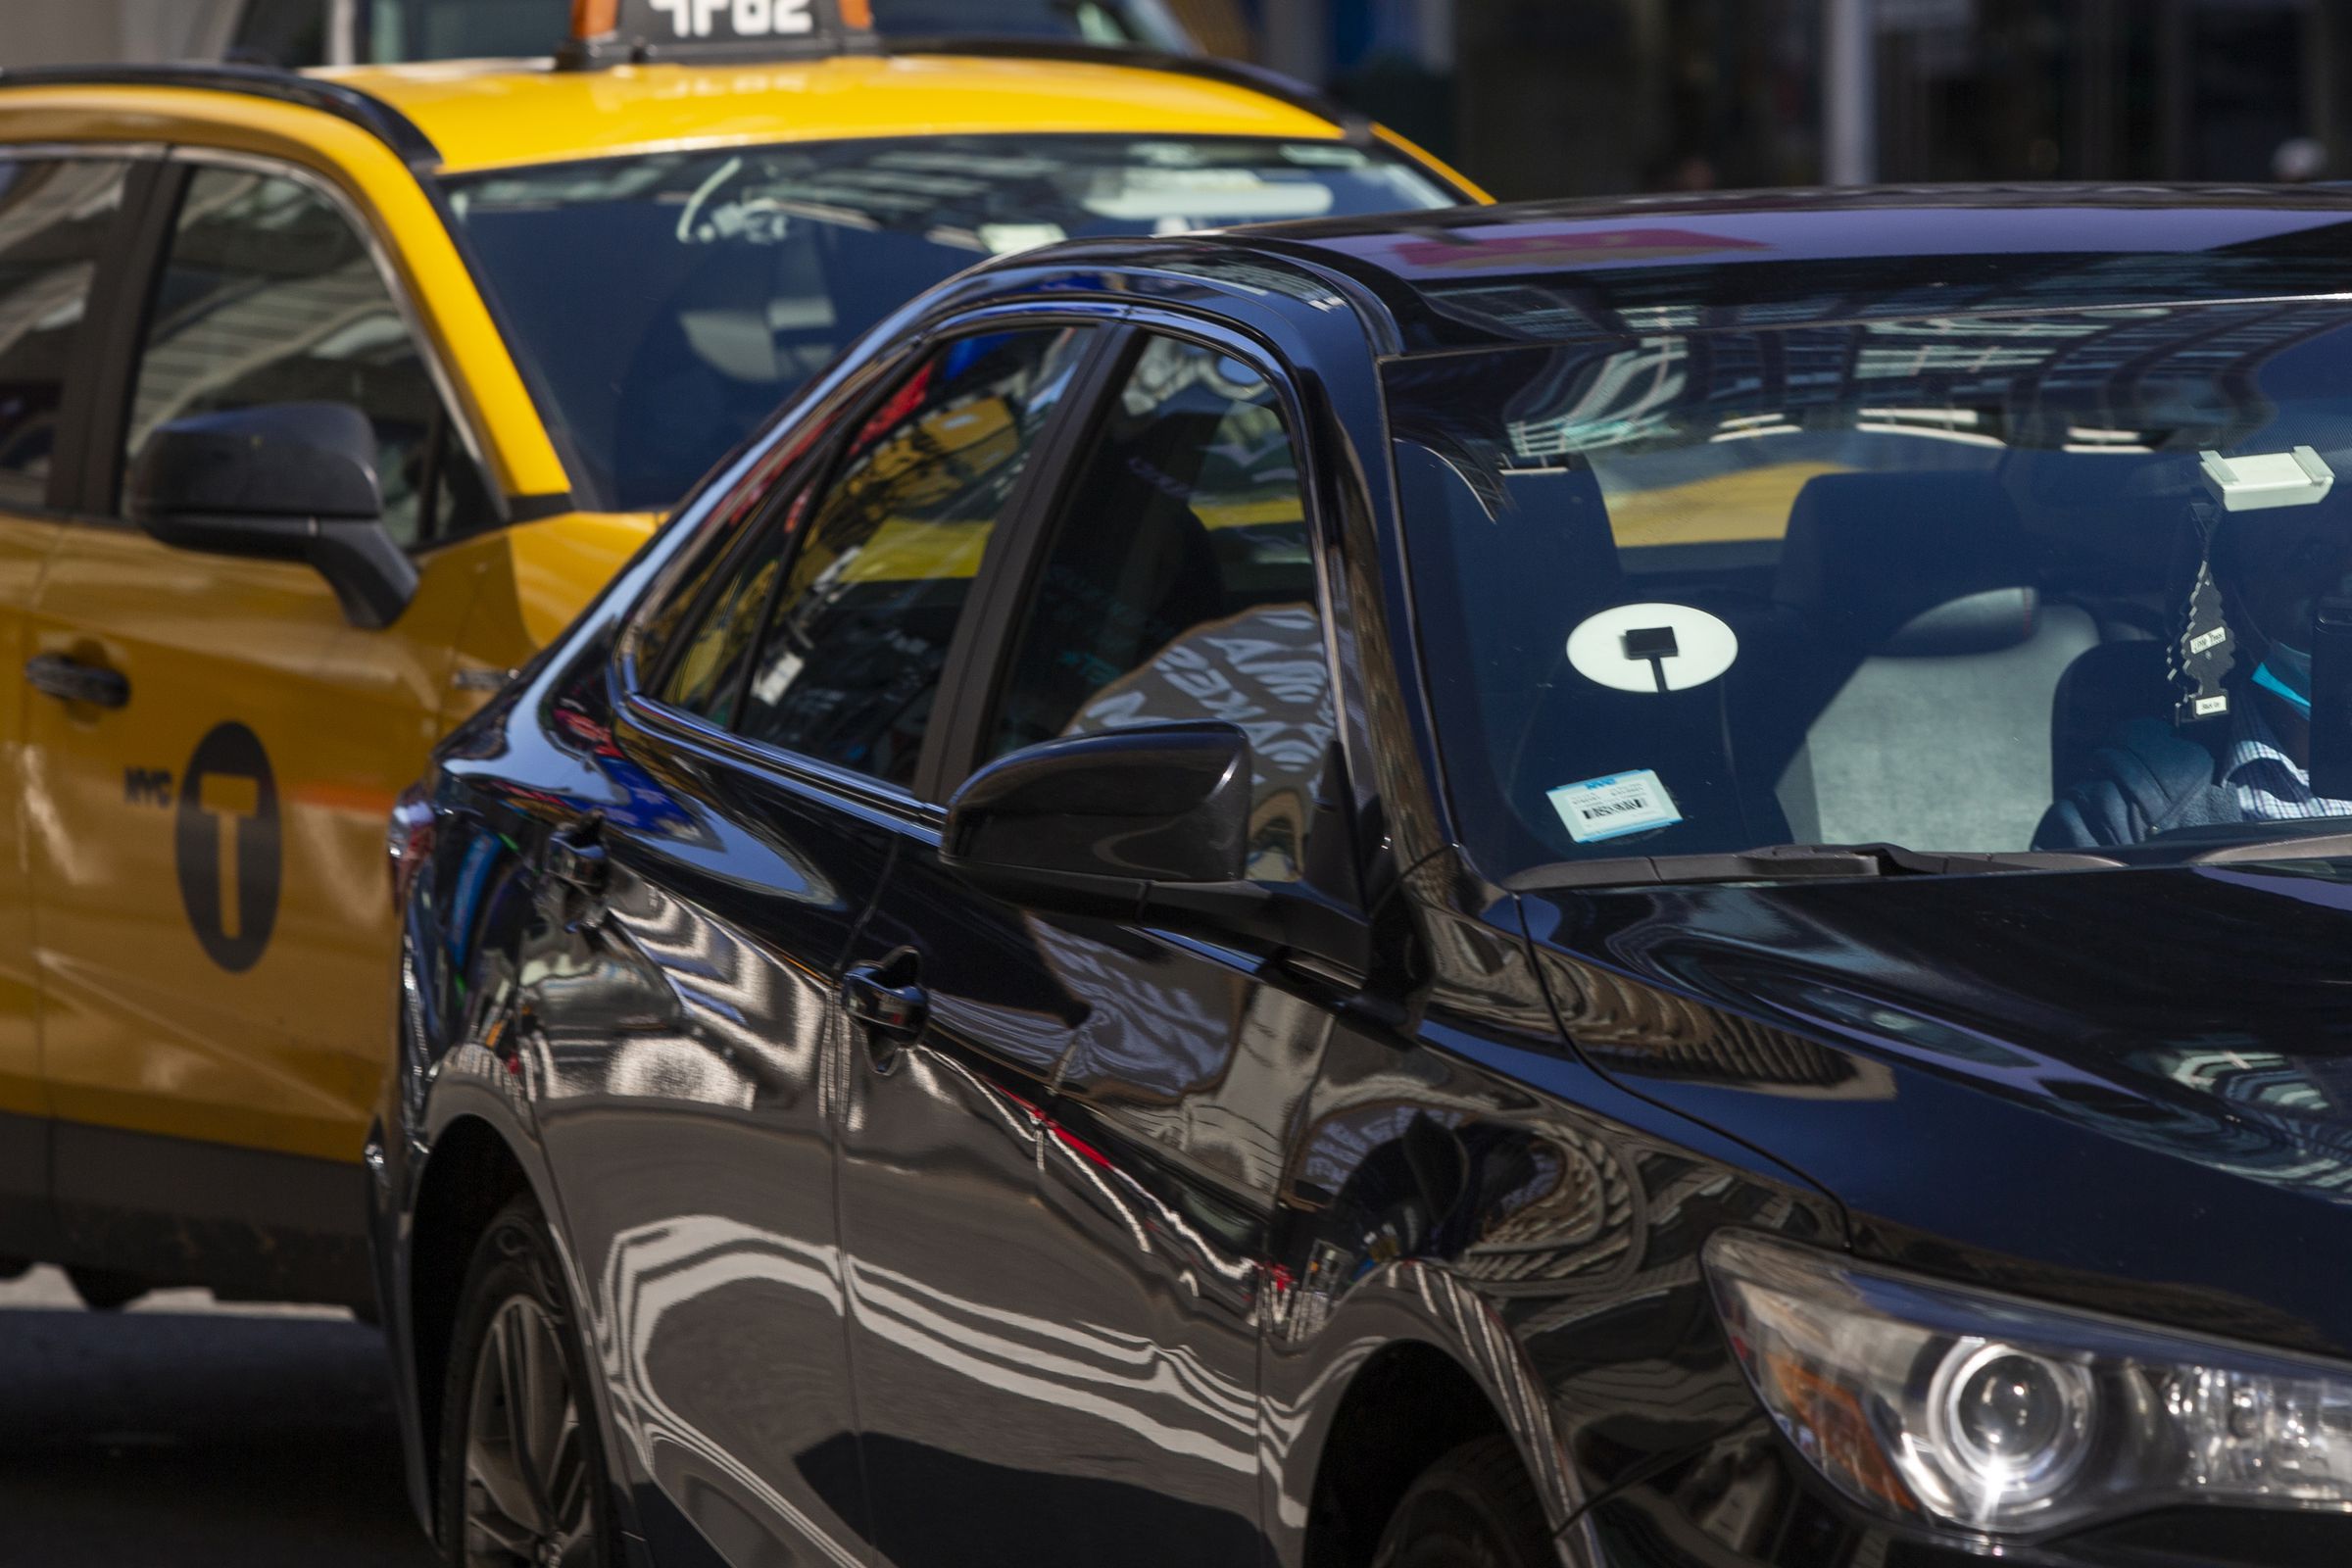 NYC bill could put Uber and yellow Cabs on single app platform